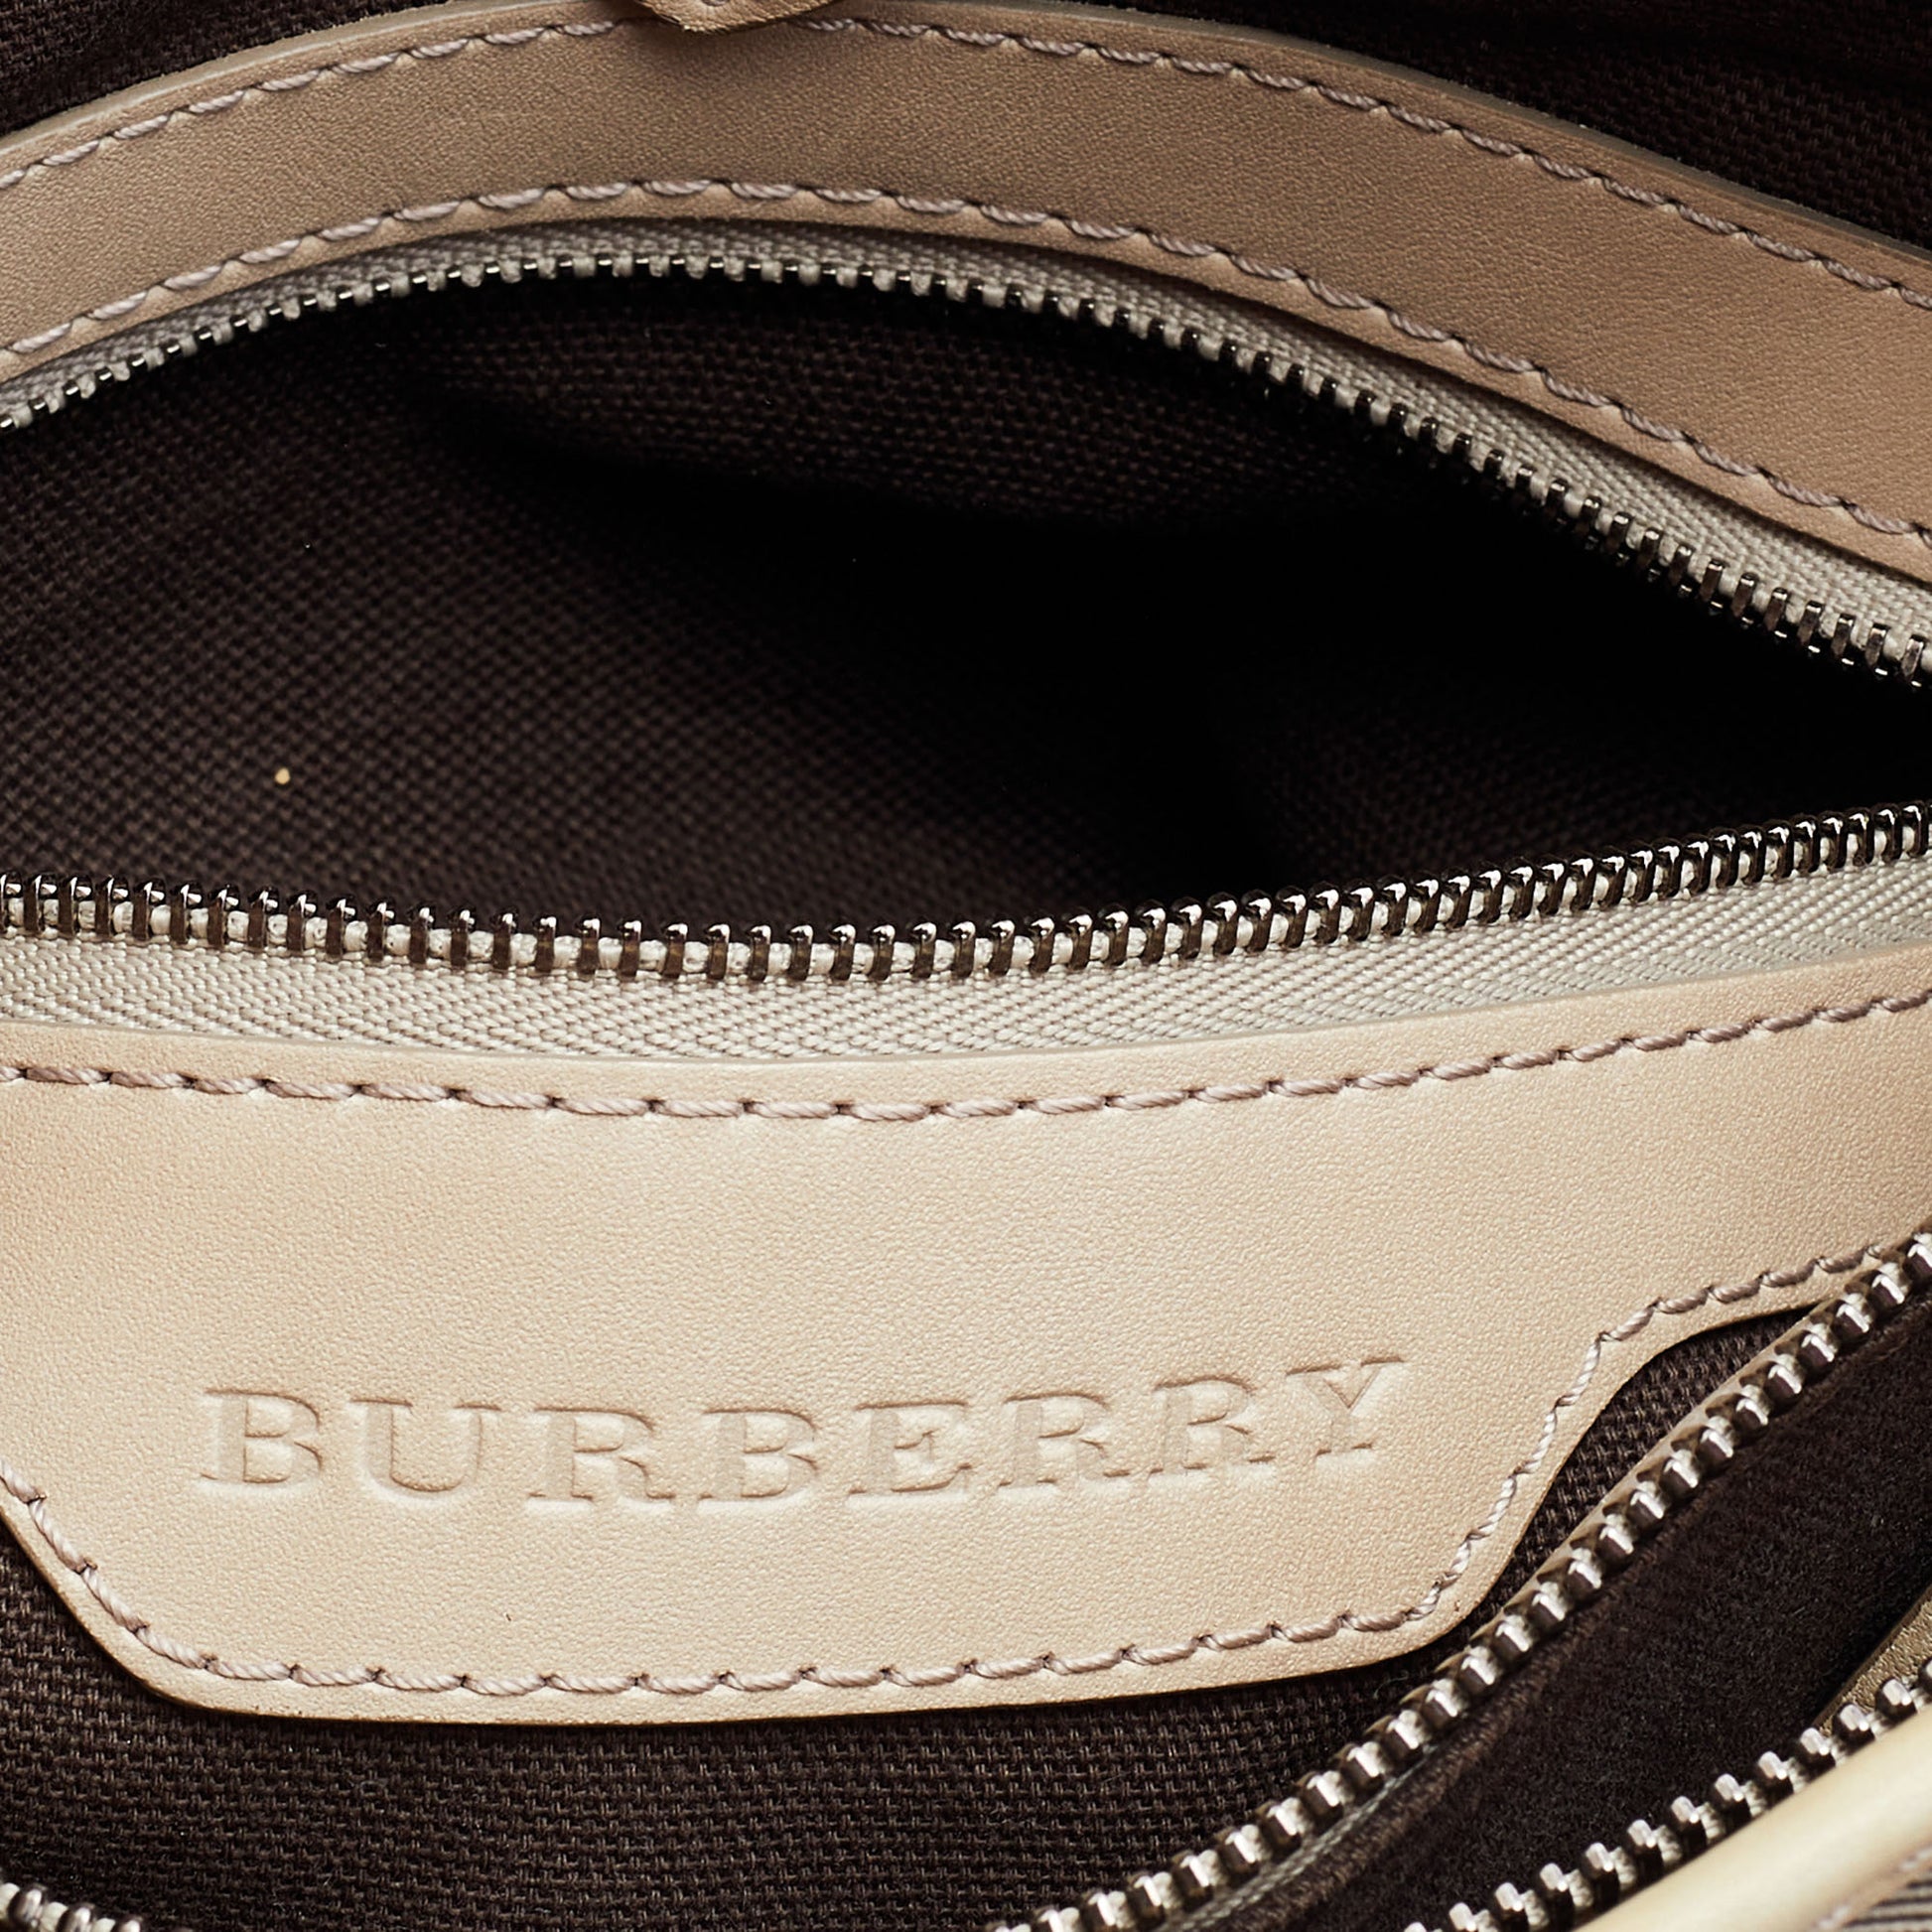 Burberry Beige Smoke Check PVC and Leather Northfield Tote Burberry